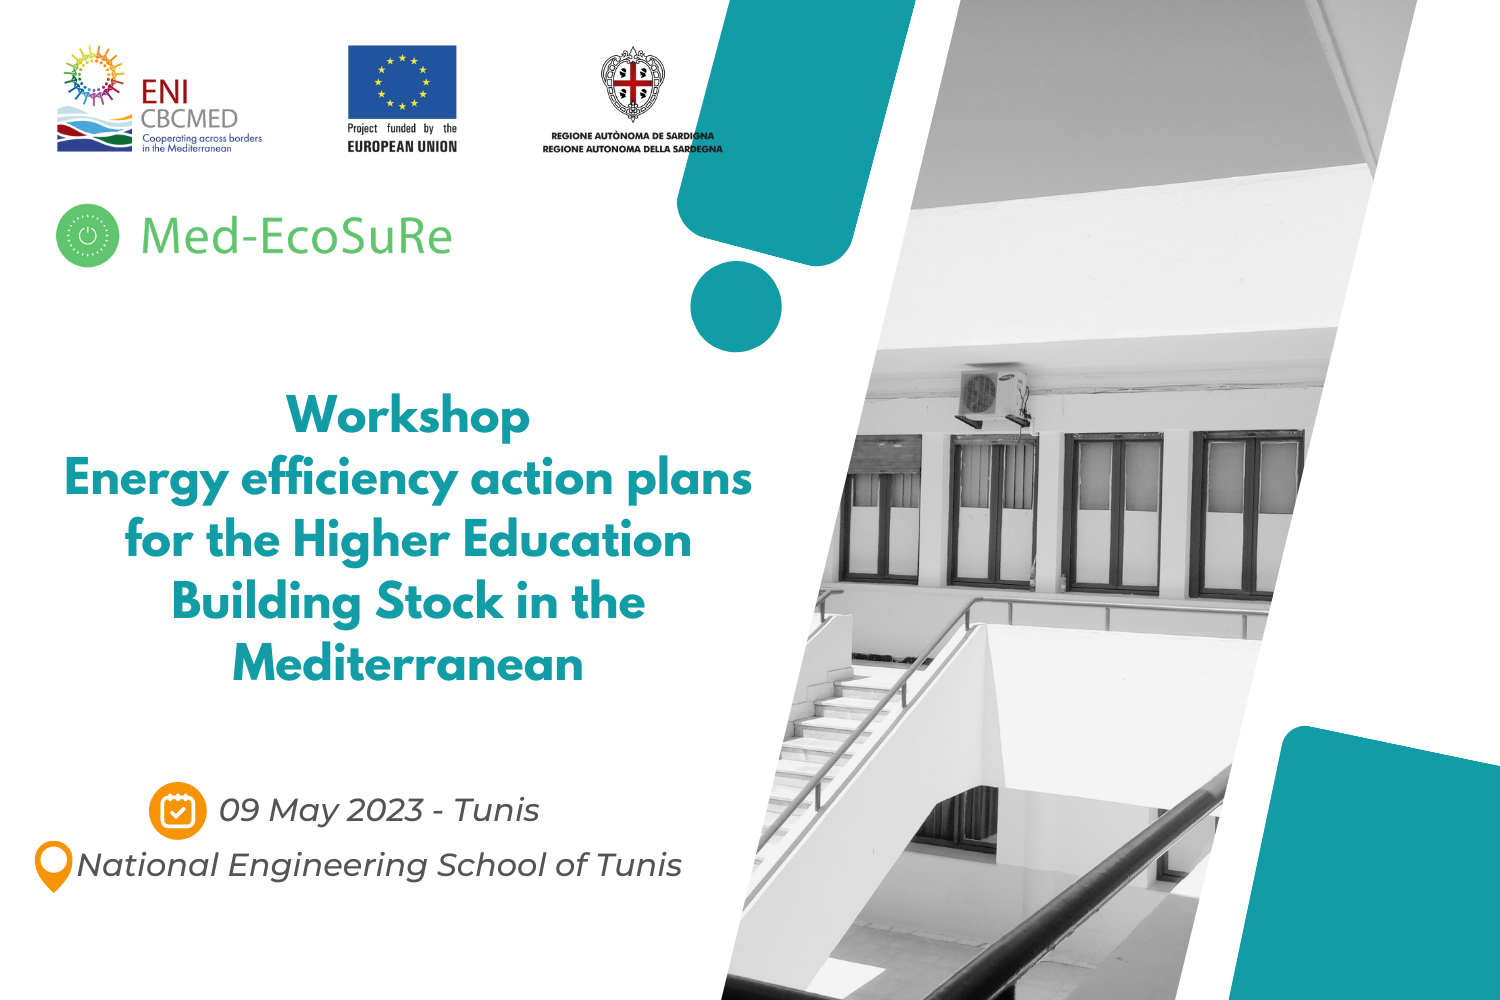 Med-EcoSuRe organizes a workshop on energy efficiency action plan for the Higher Education Building Sector in Tunisia